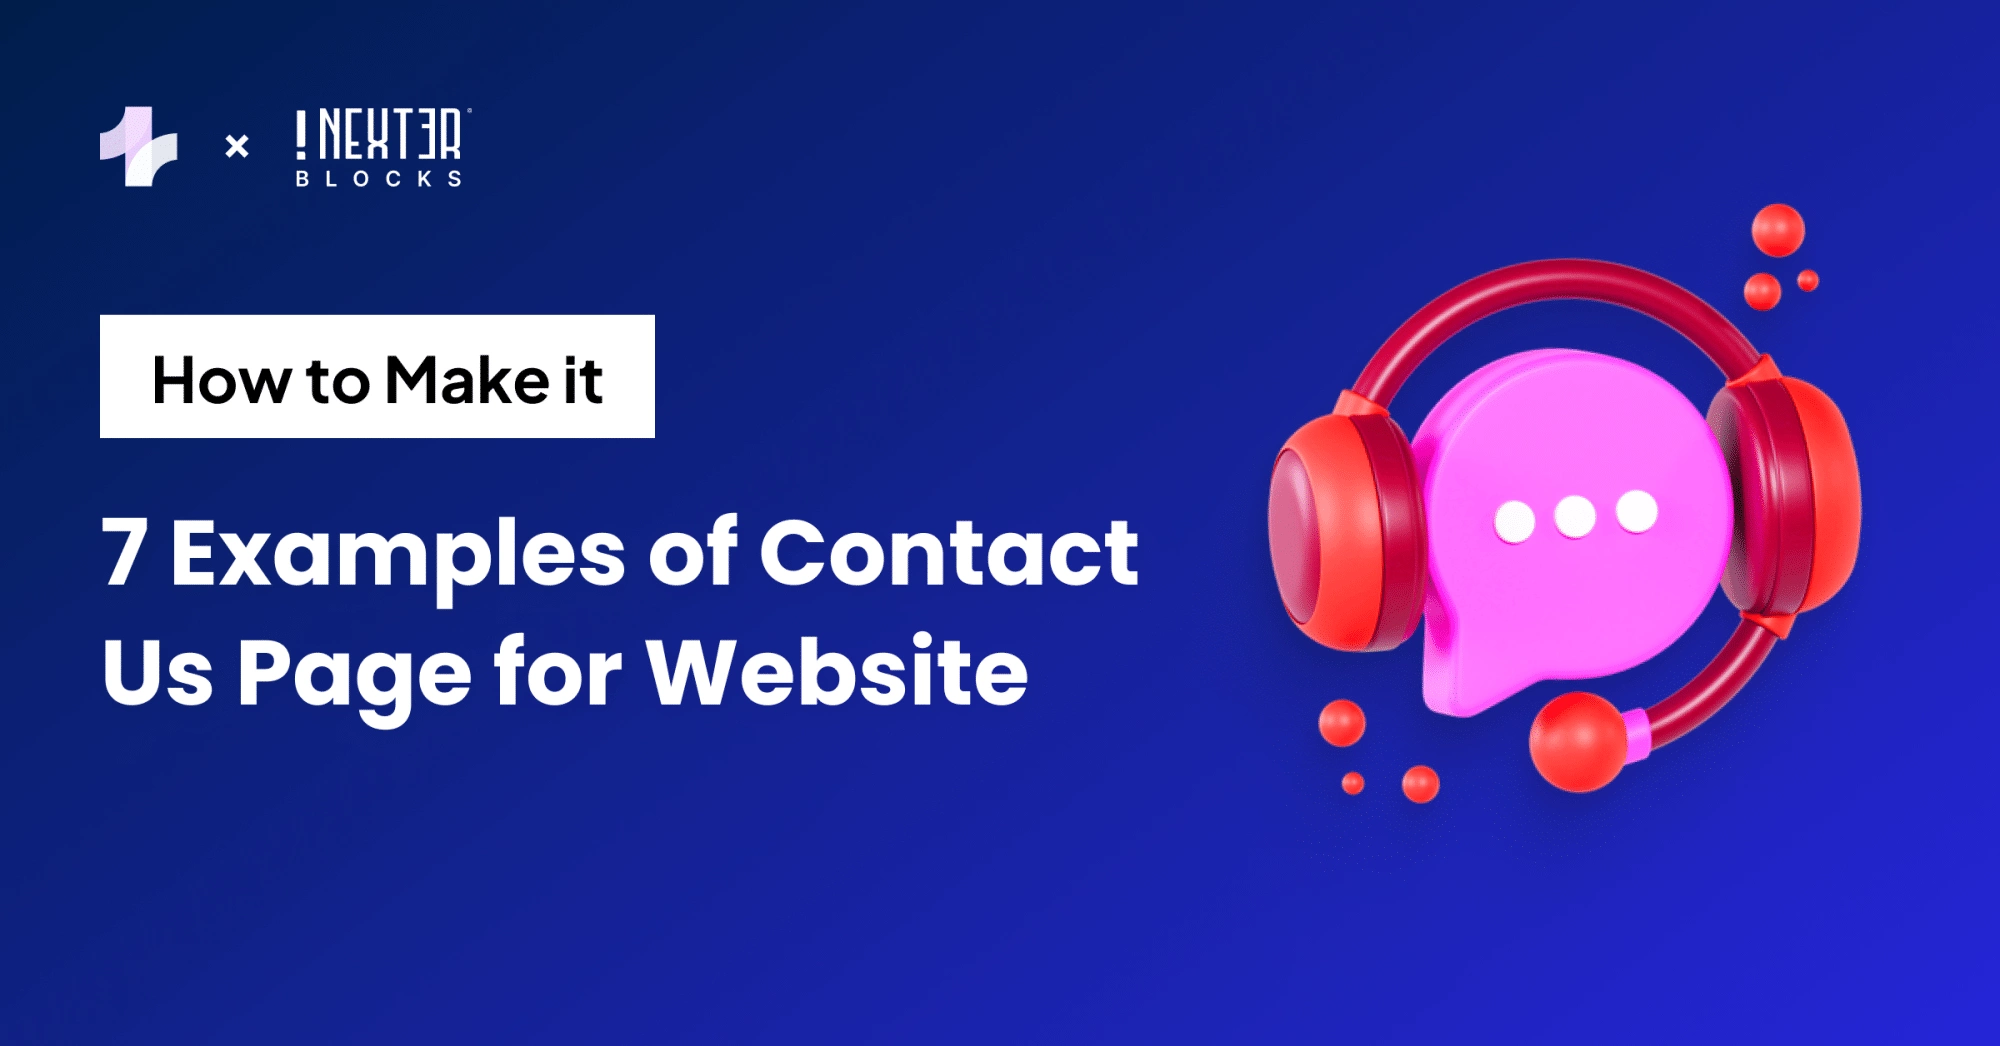 7 Examples of Contact Us Page for Website How to Make it - 7 Examples of Contact Us Page for Website [+ How to Make it]